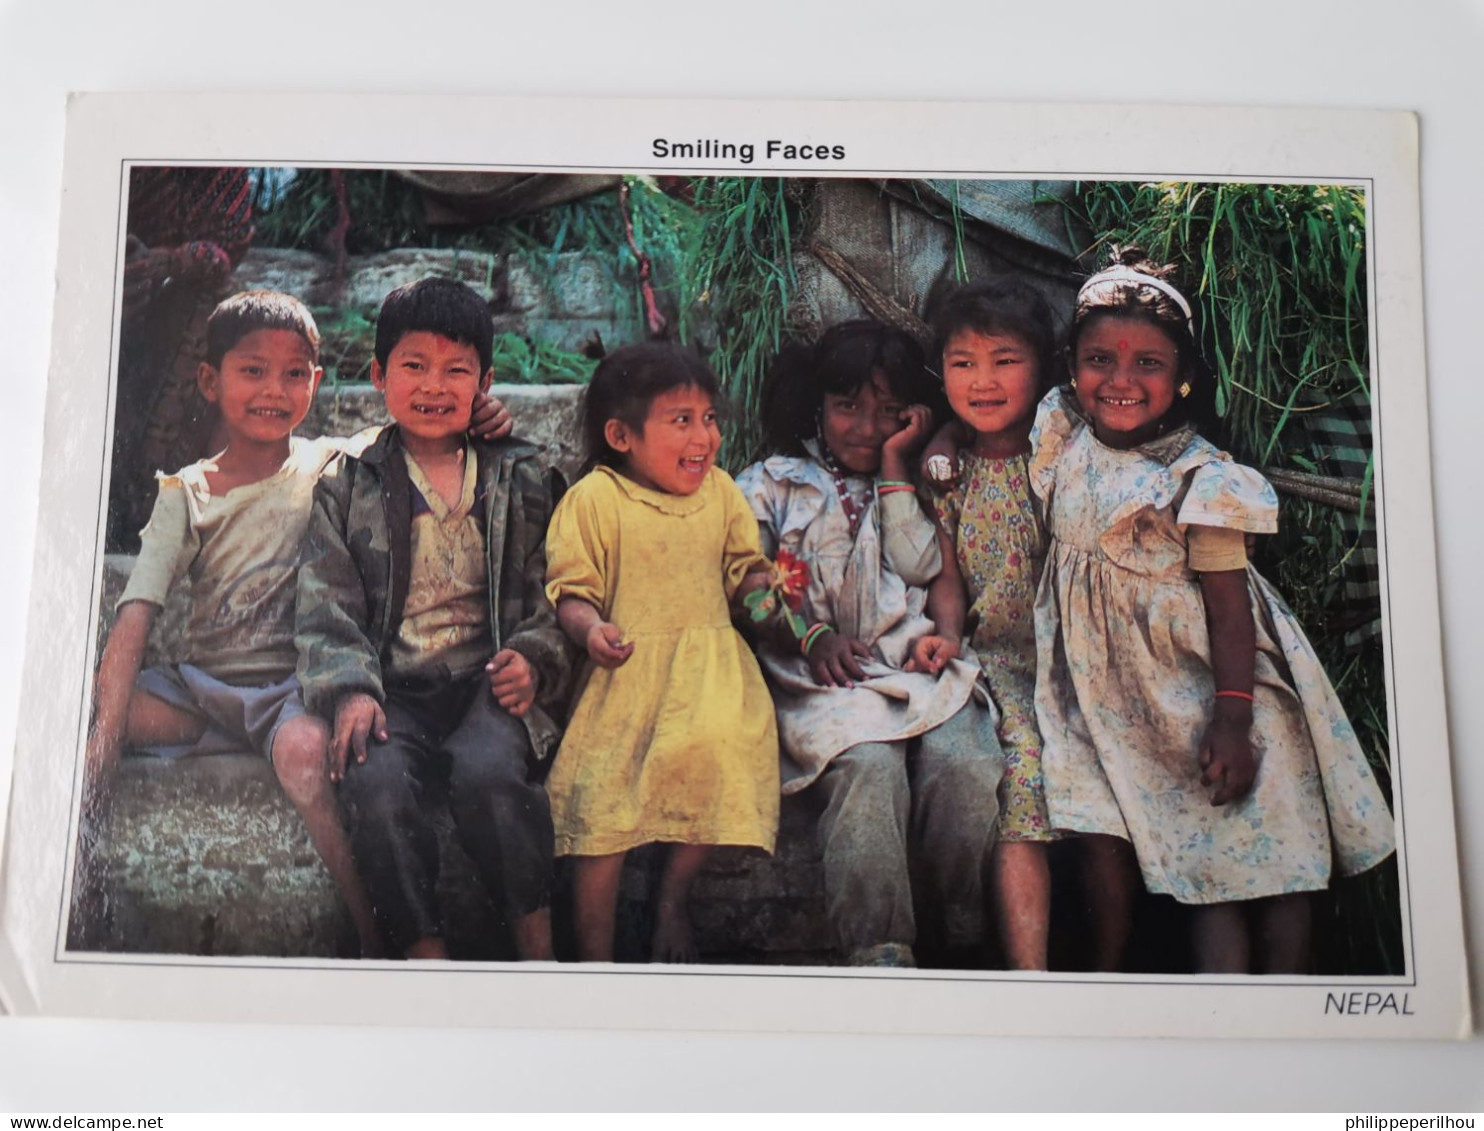 Smiling Faces - Nepal